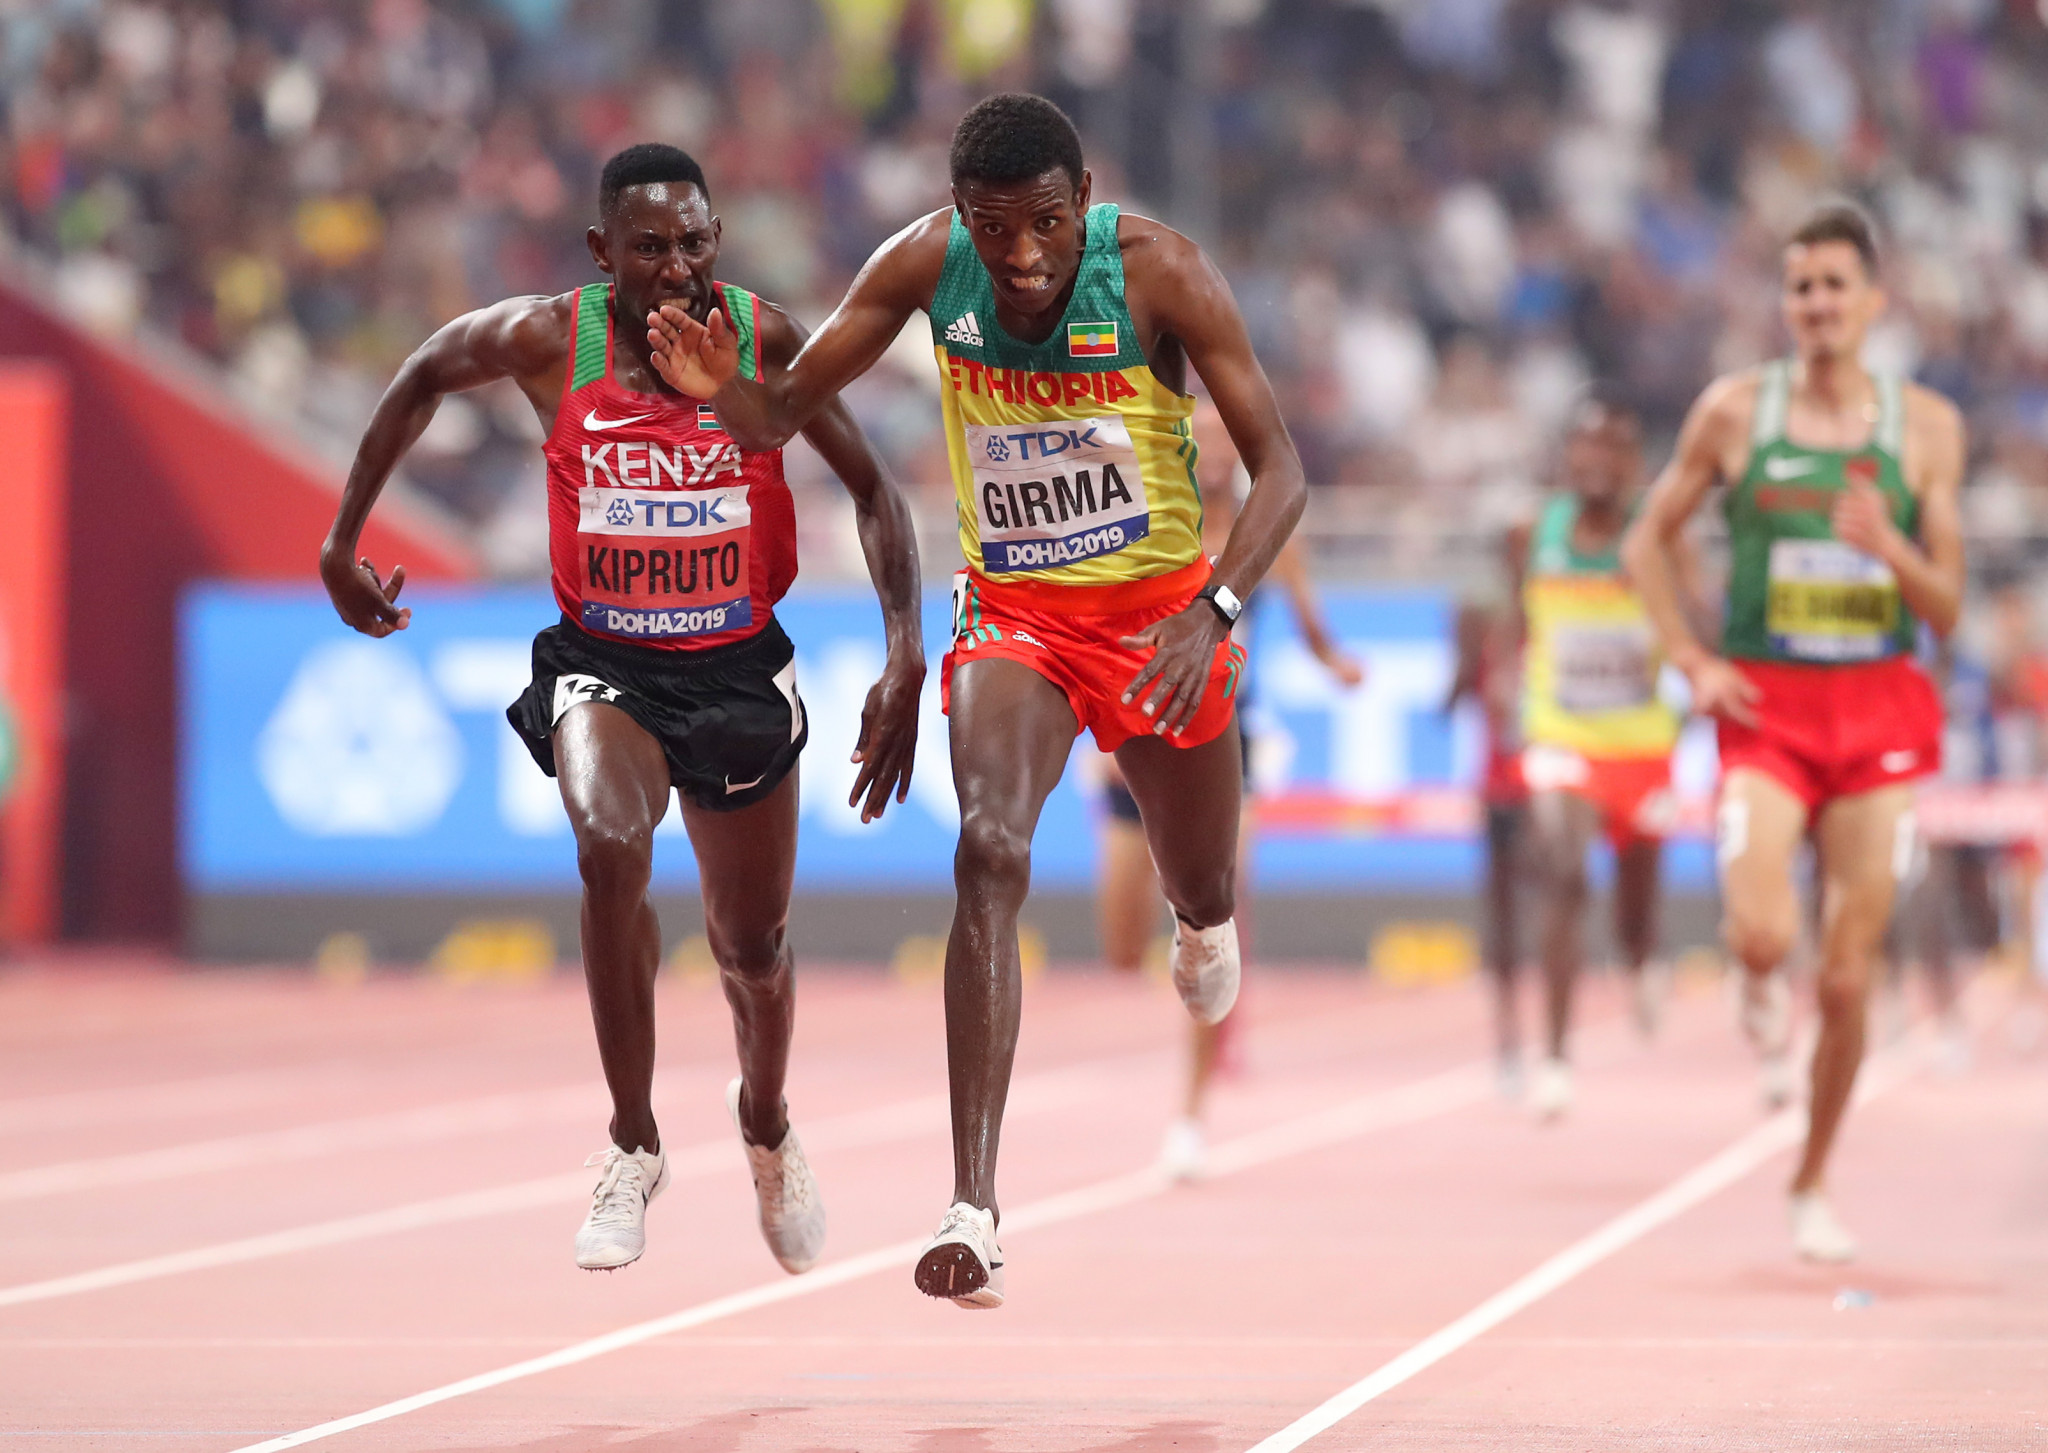 Kenya's Conseslus Kipruto clinched victory in the 3,000m steeplechase on the last stride by beating Ethiopia's Lamecha Girma in a finish that was more like a sprint race ©Getty Images